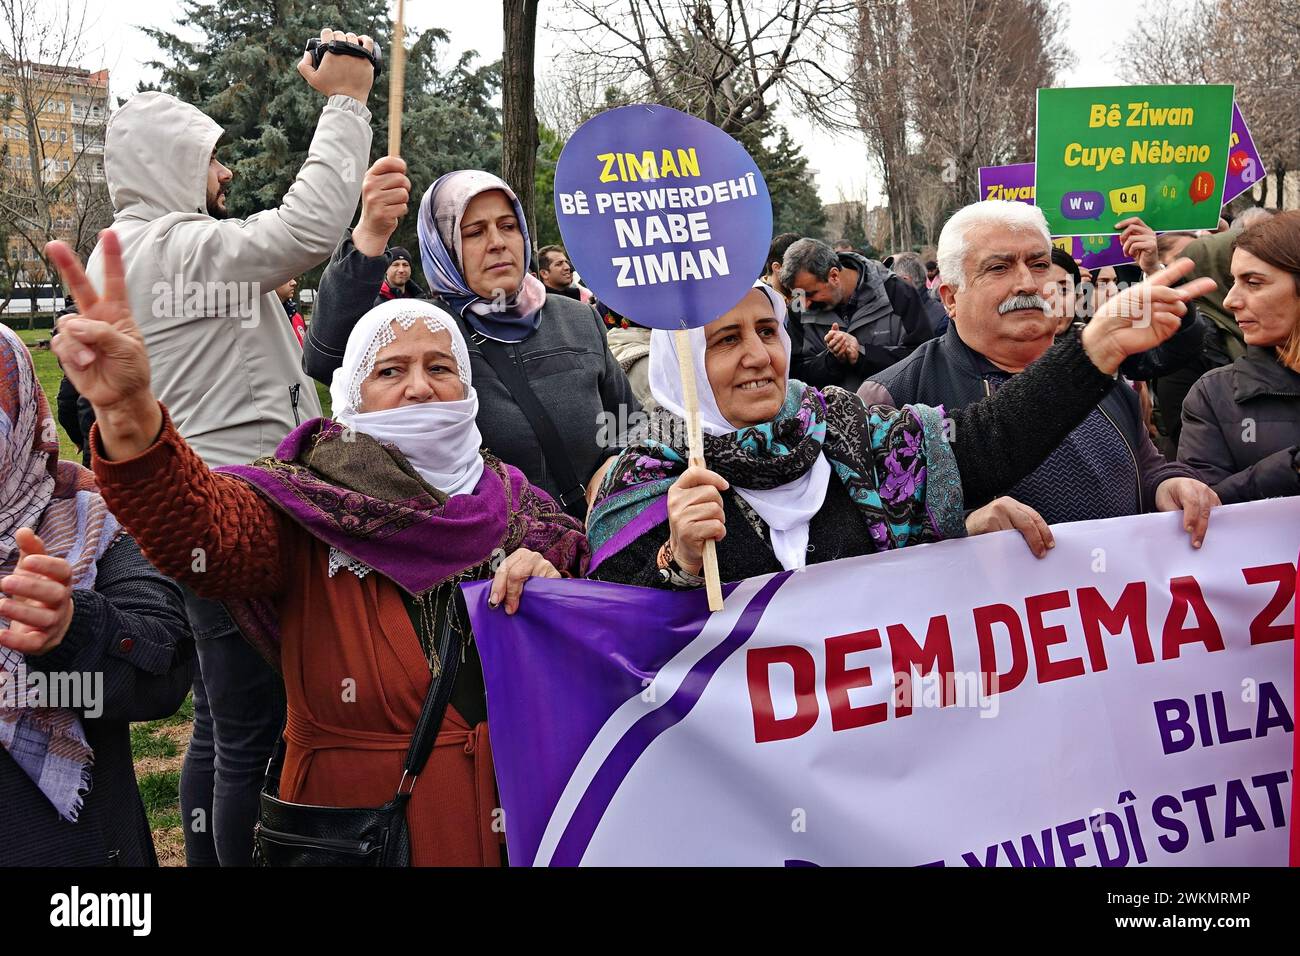 Participants hold a banner and placard during the International Mother Language Day demonstration. The International Mother Language Day is celebrated with a march in Diyarbakir, Turkey. The demonstration, is attended by the Peoples' Equality and Democracy Party (DEM Party), Democratic Regions Party (DBP) and some Kurdish organisations, demanding that the Kurdish language be accepted as an official language and that education be provided with it. Demonstrations are organised in all Kurdish-populated cities in Turkey to protest against the oppression of the Kurdish language. In Turkey, Kurdish Stock Photo